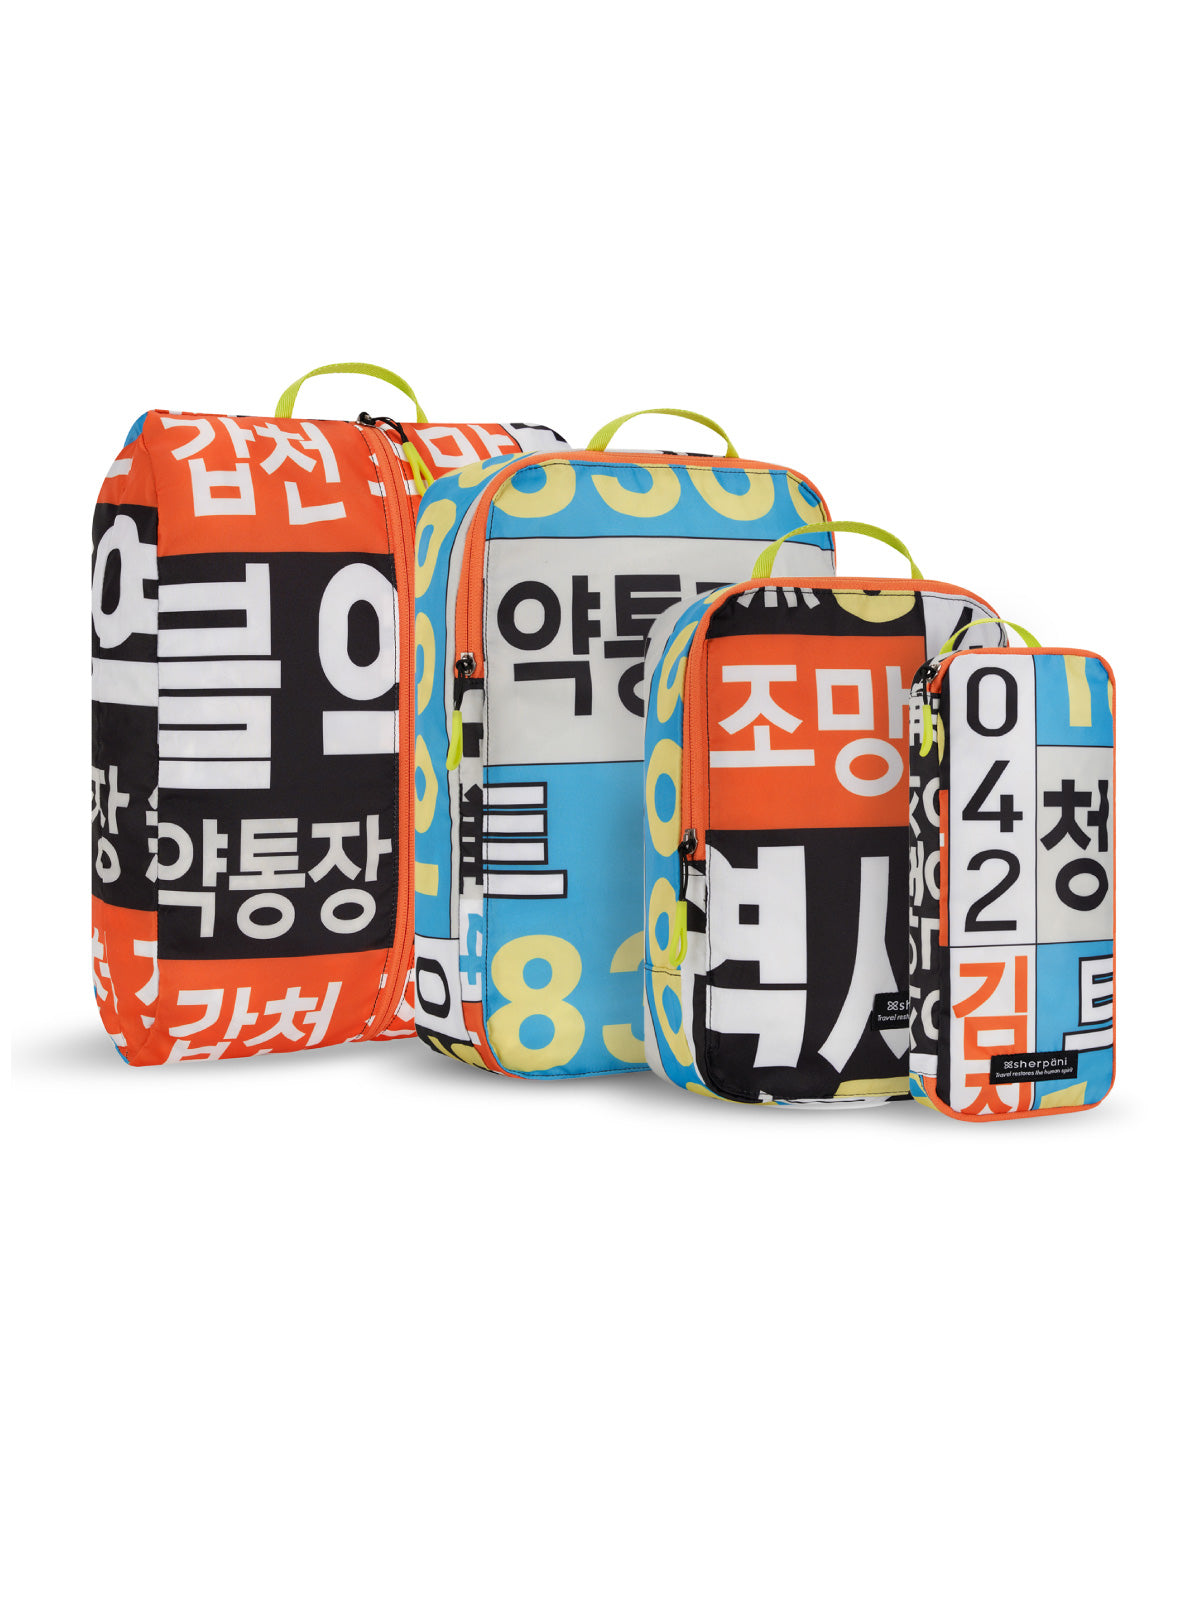 compass travel bags